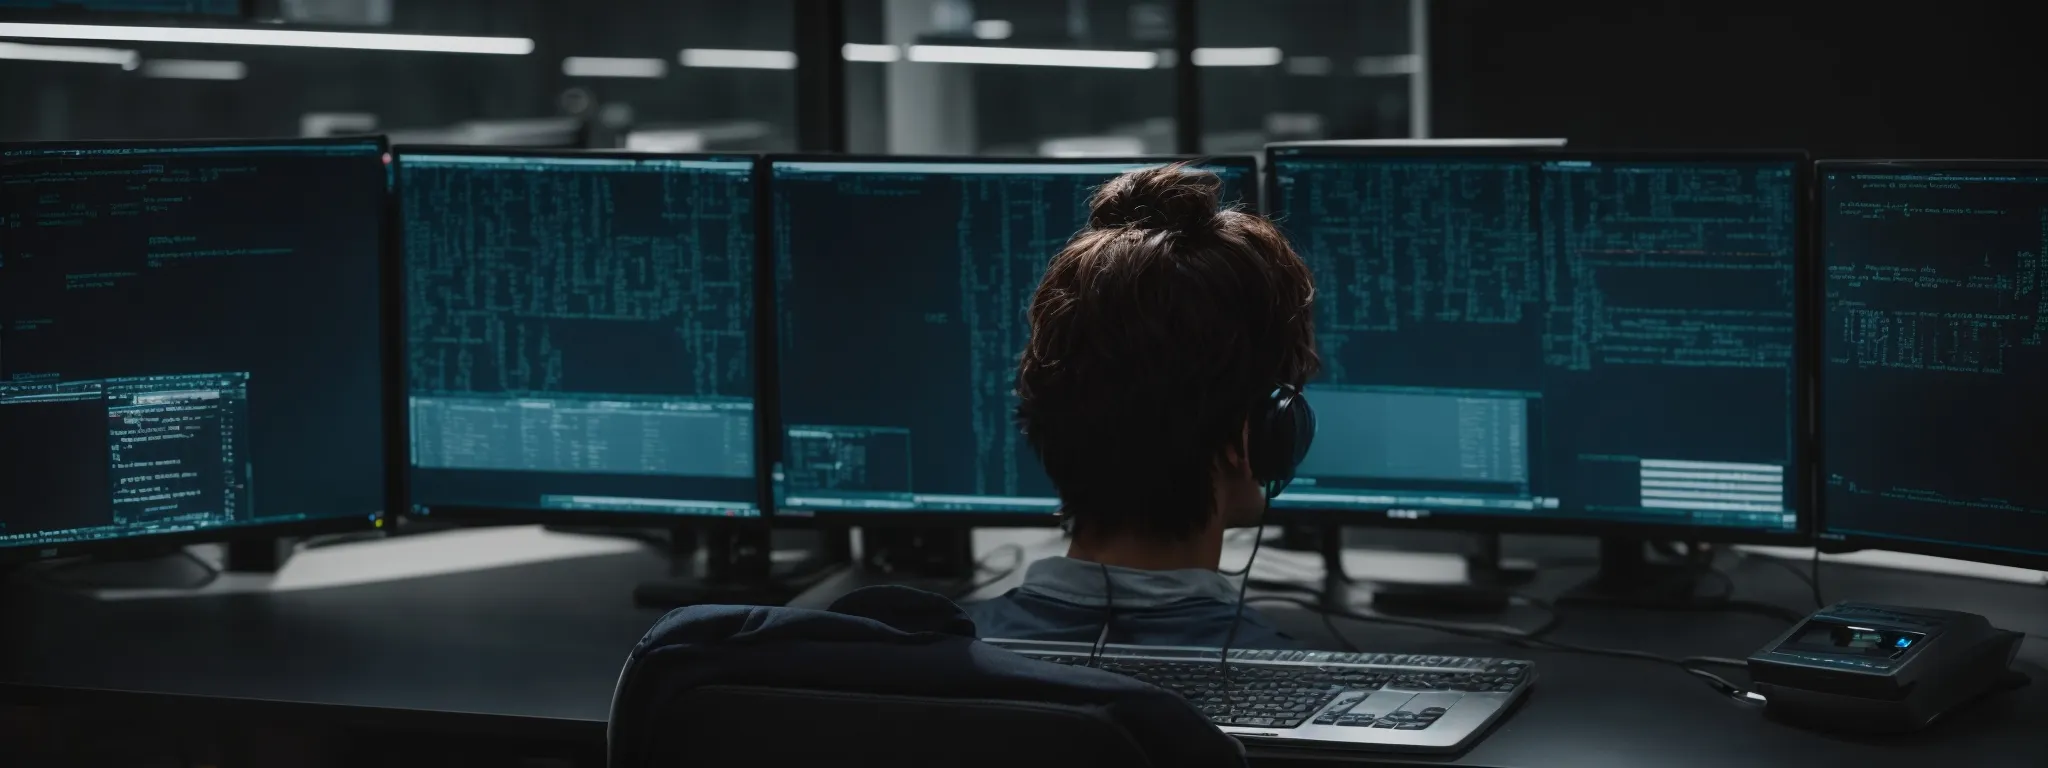 a web designer sits before multiple monitors displaying code and a secure padlock symbol, highlighting the importance of website security and accessibility in seo.